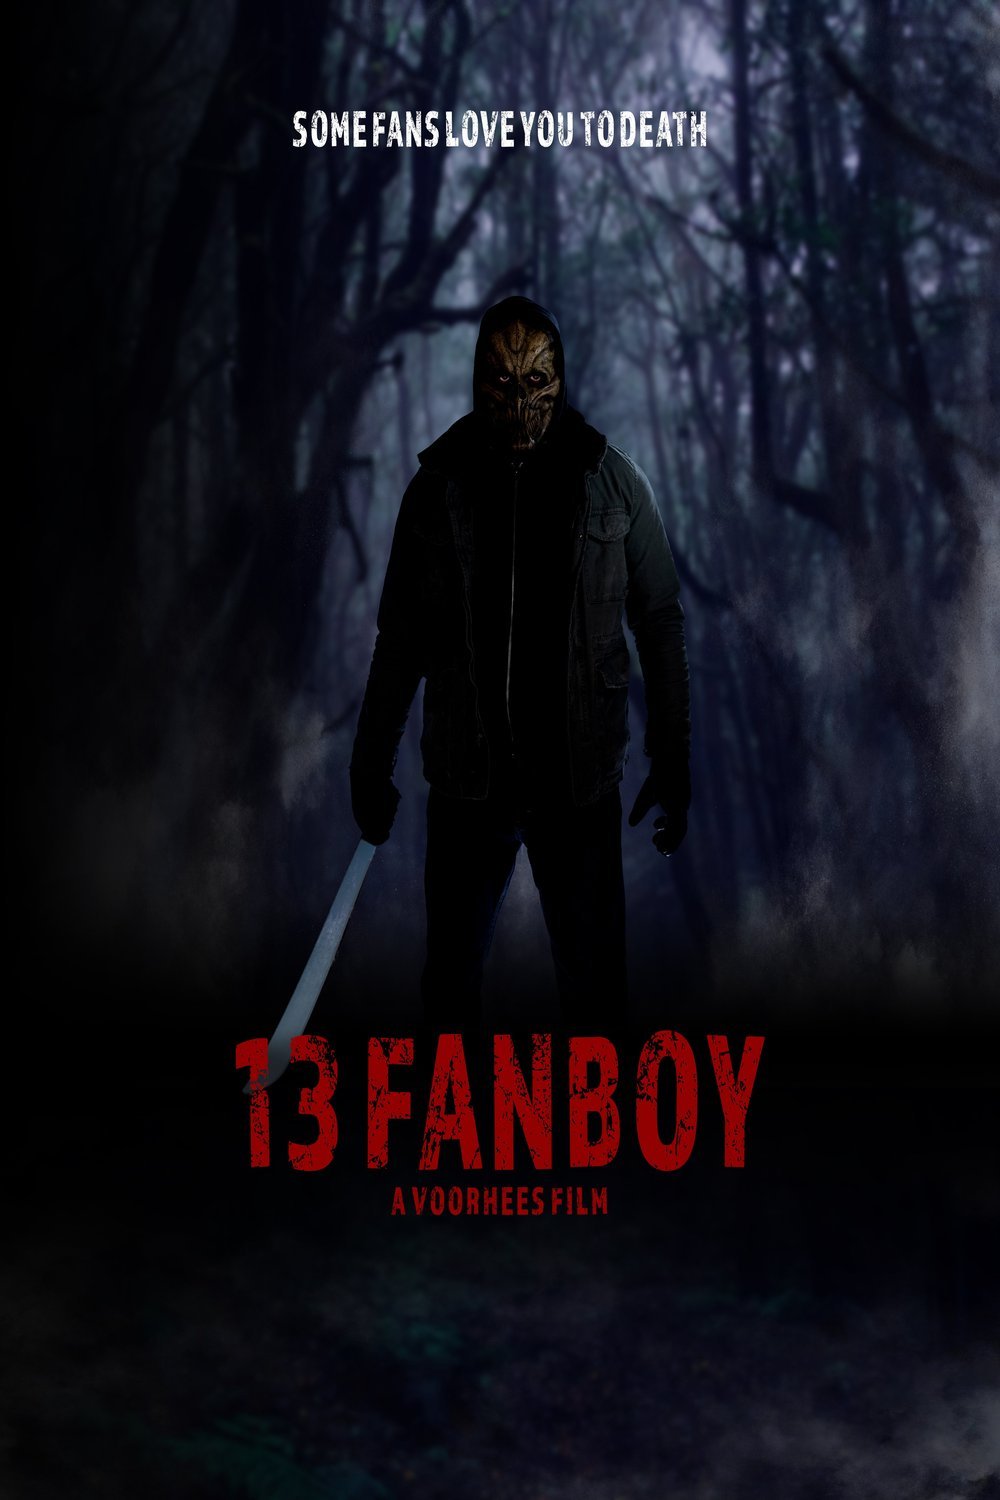 Poster of the movie 13 Fanboy